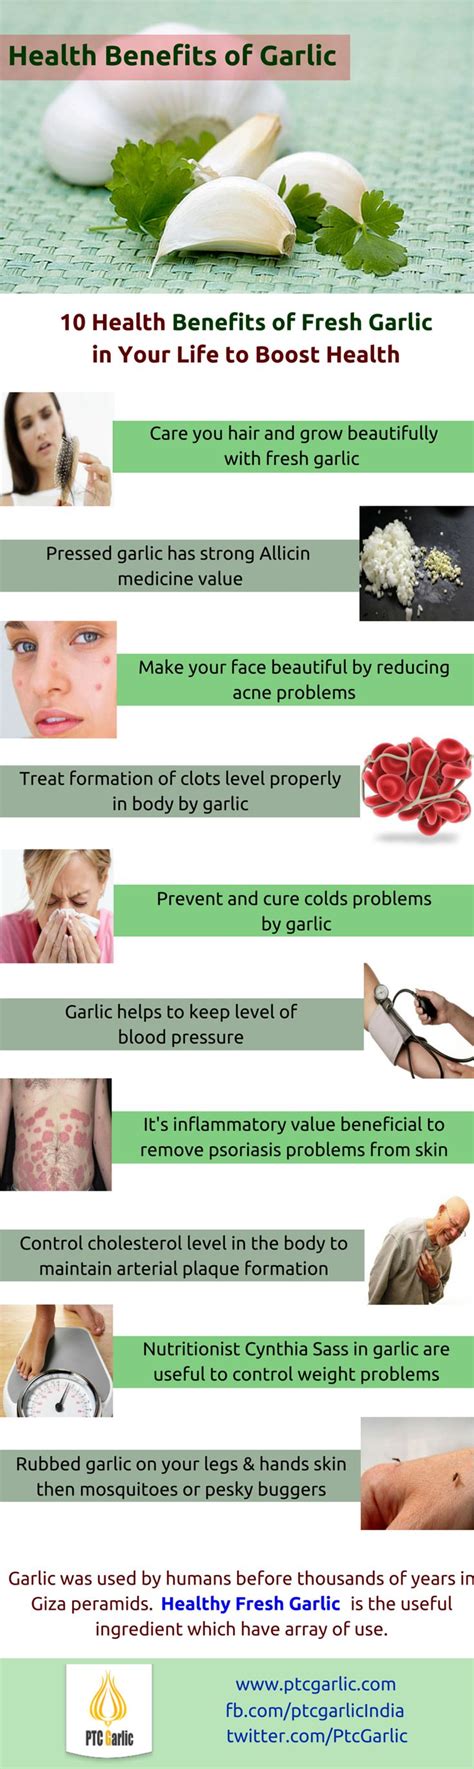 10 Health Benefits Of Fresh Garlic In Your Life To Boost Health